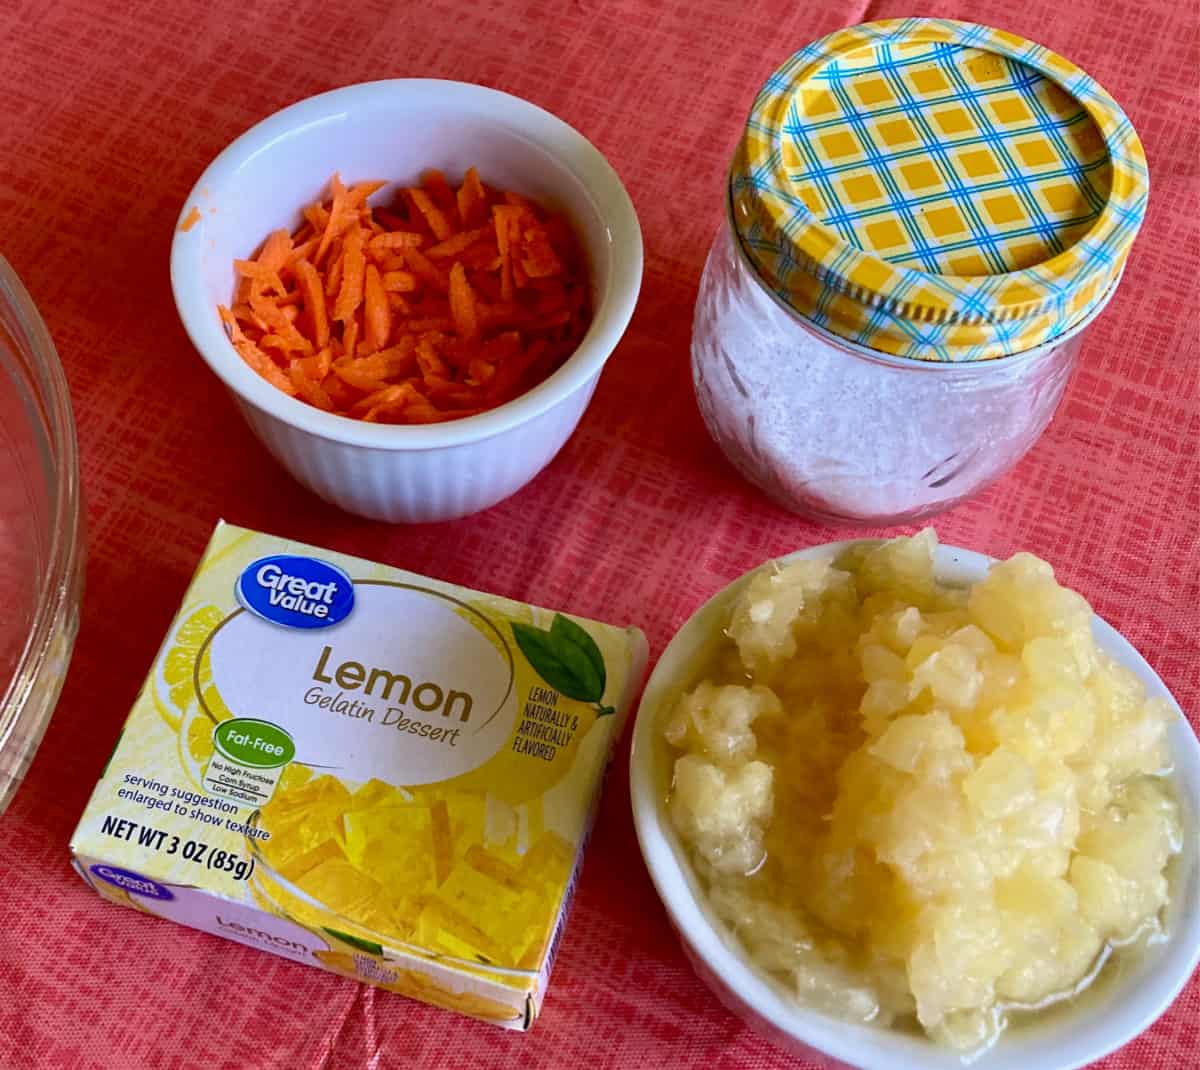 Ingredients including shredded carrot, crushed pineapple and package of lemon gelatin.